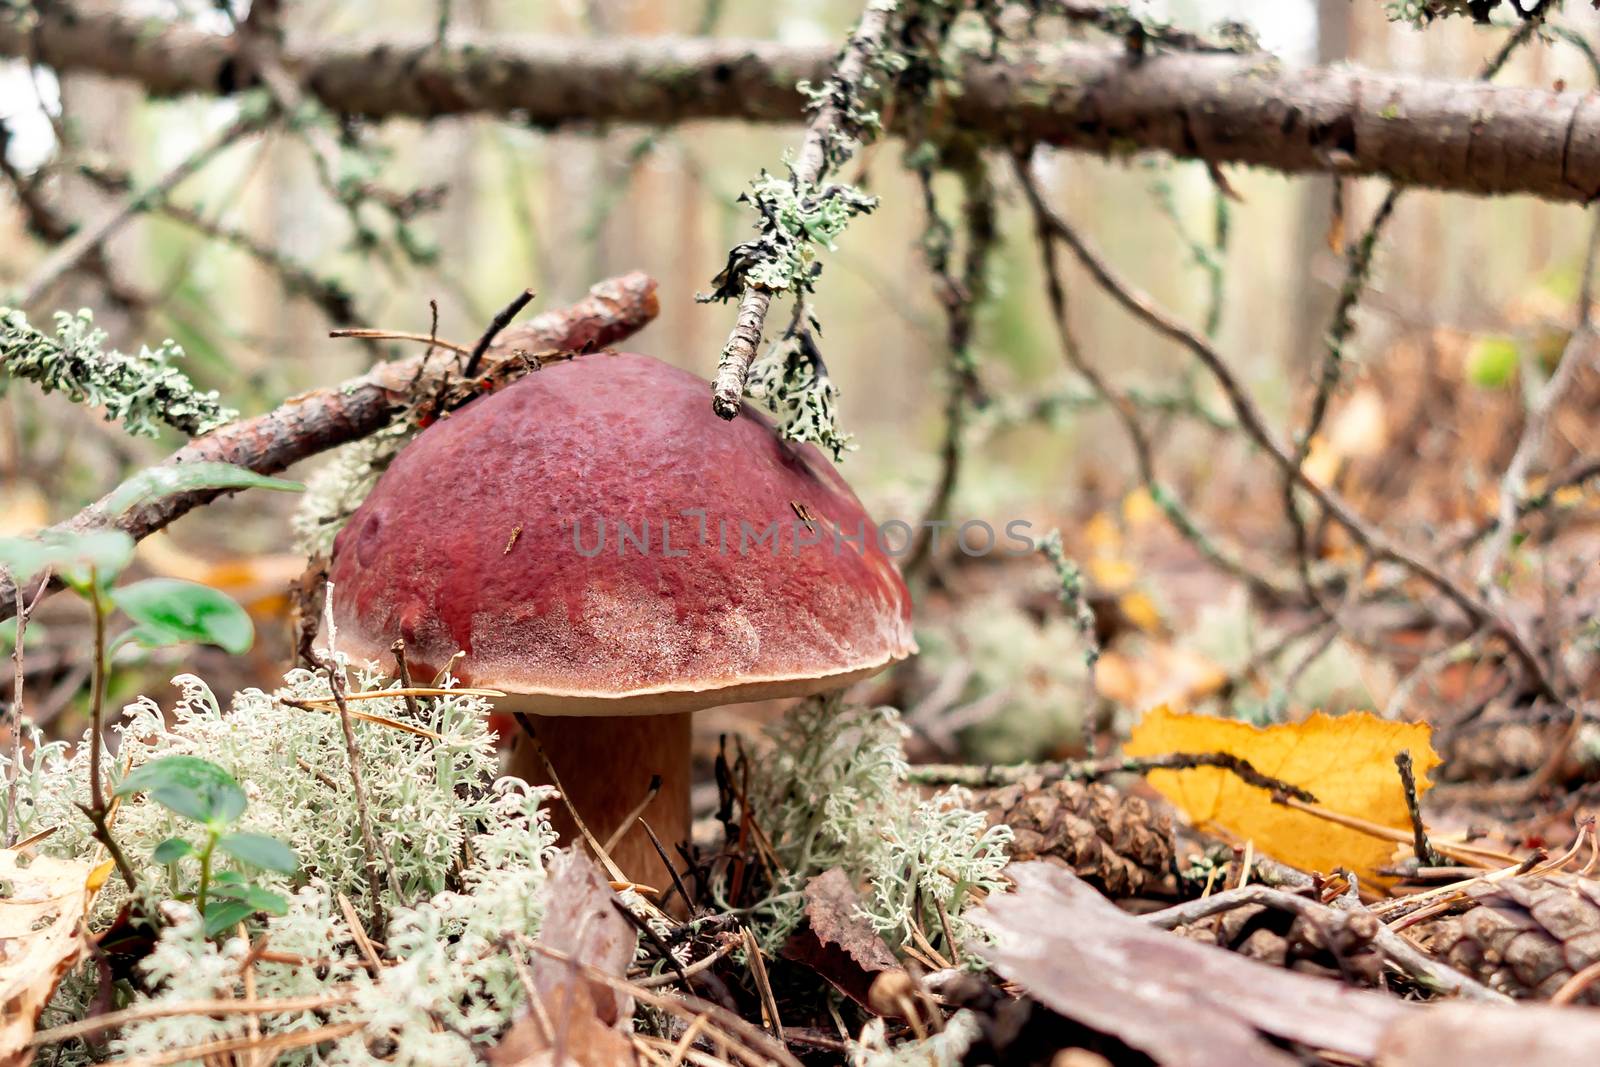 Edible boletus edulis mushroom, known as a penny bun or king bolete growing in a pine forest - image.